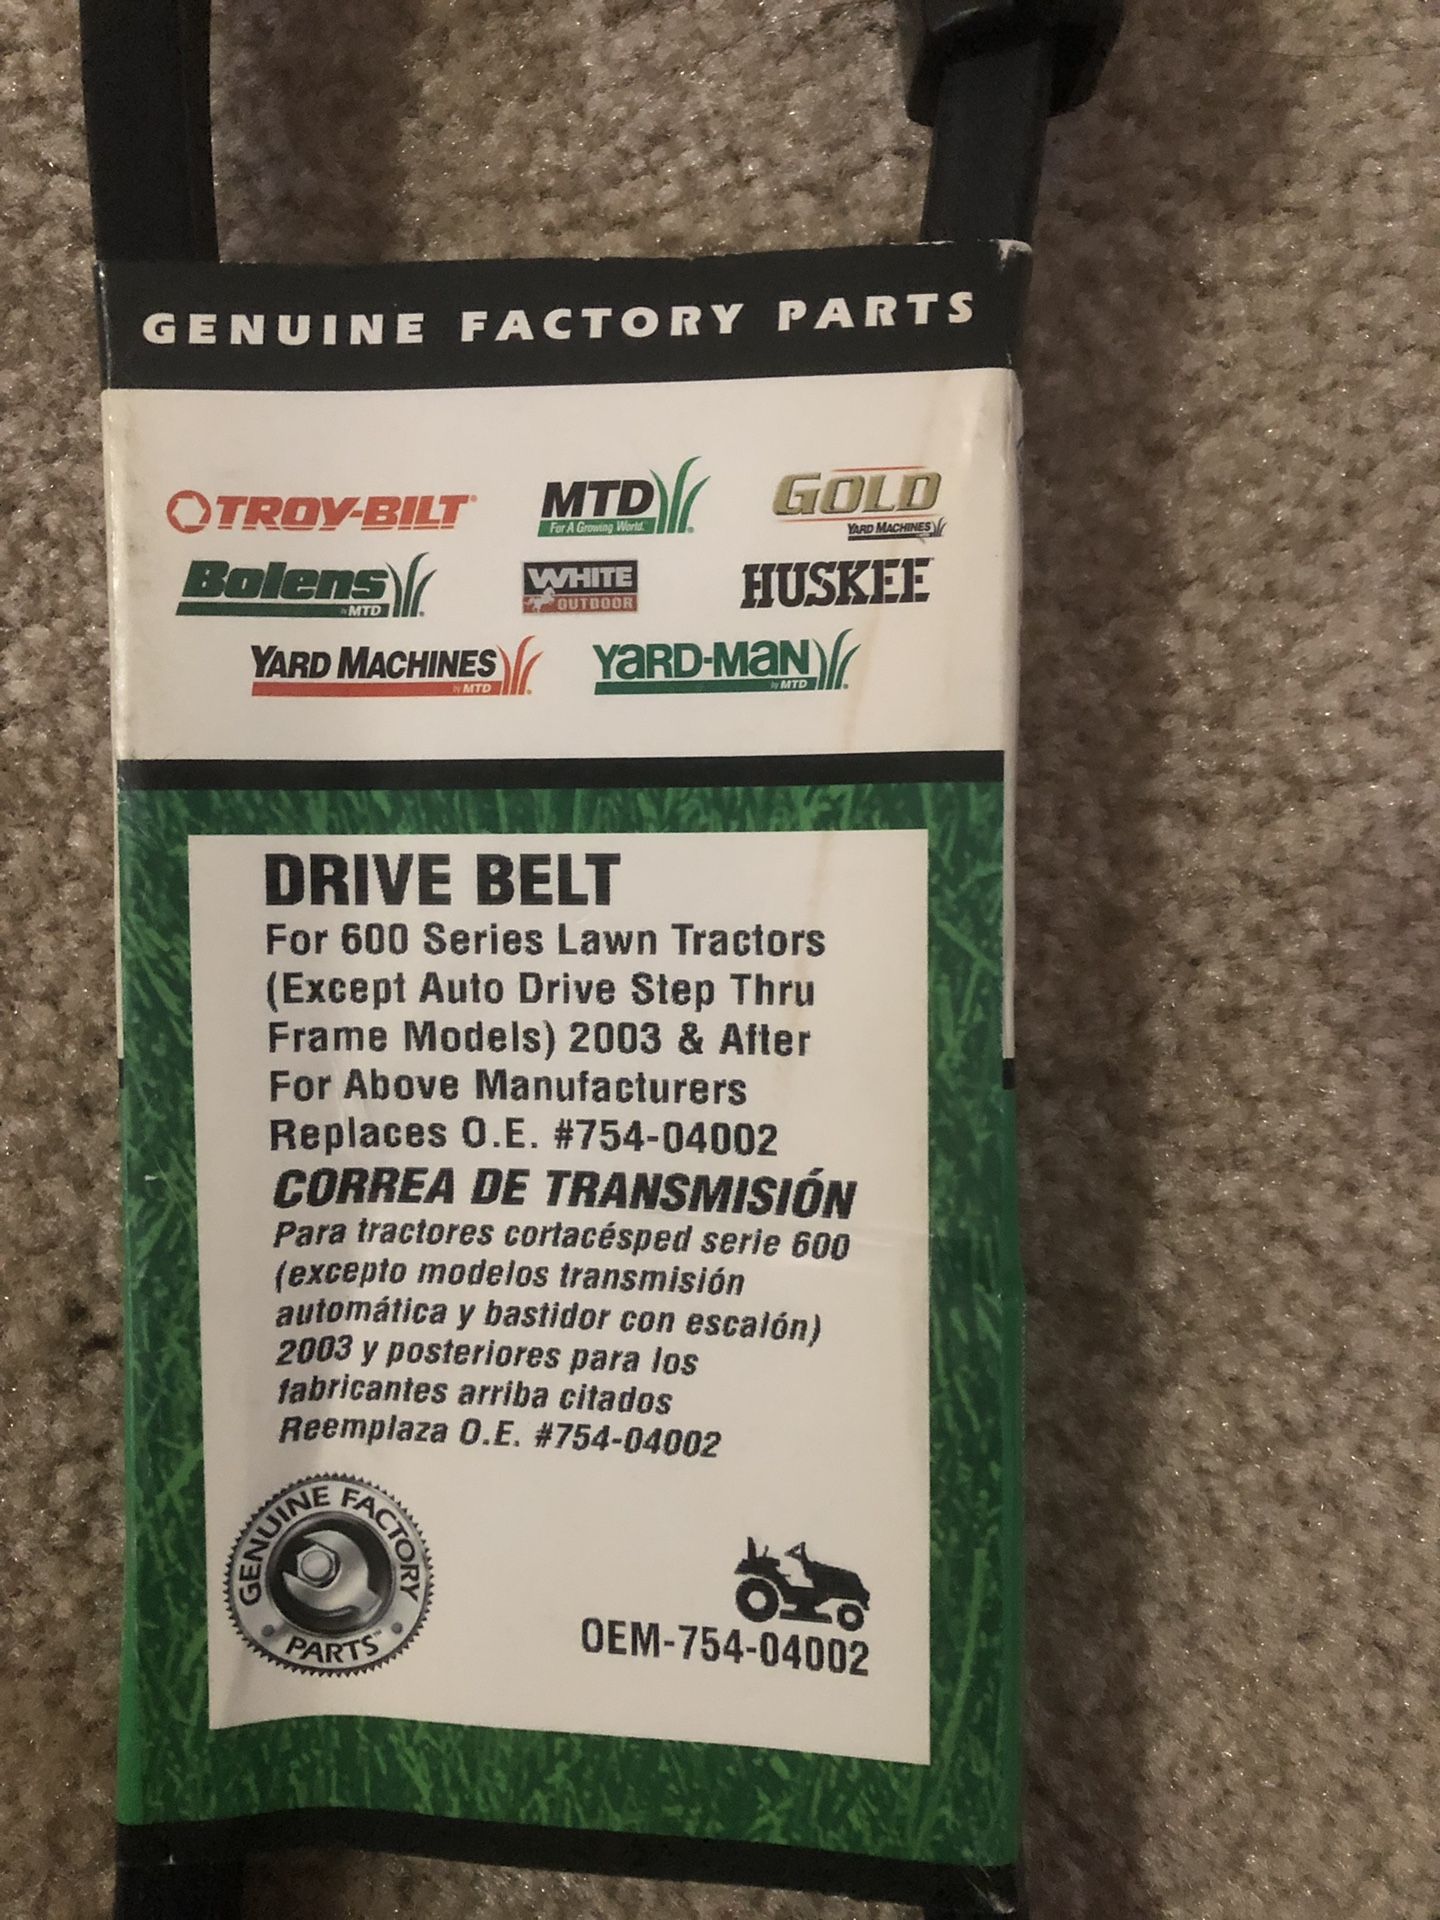 Drive belt for Lawn tractor 600 series